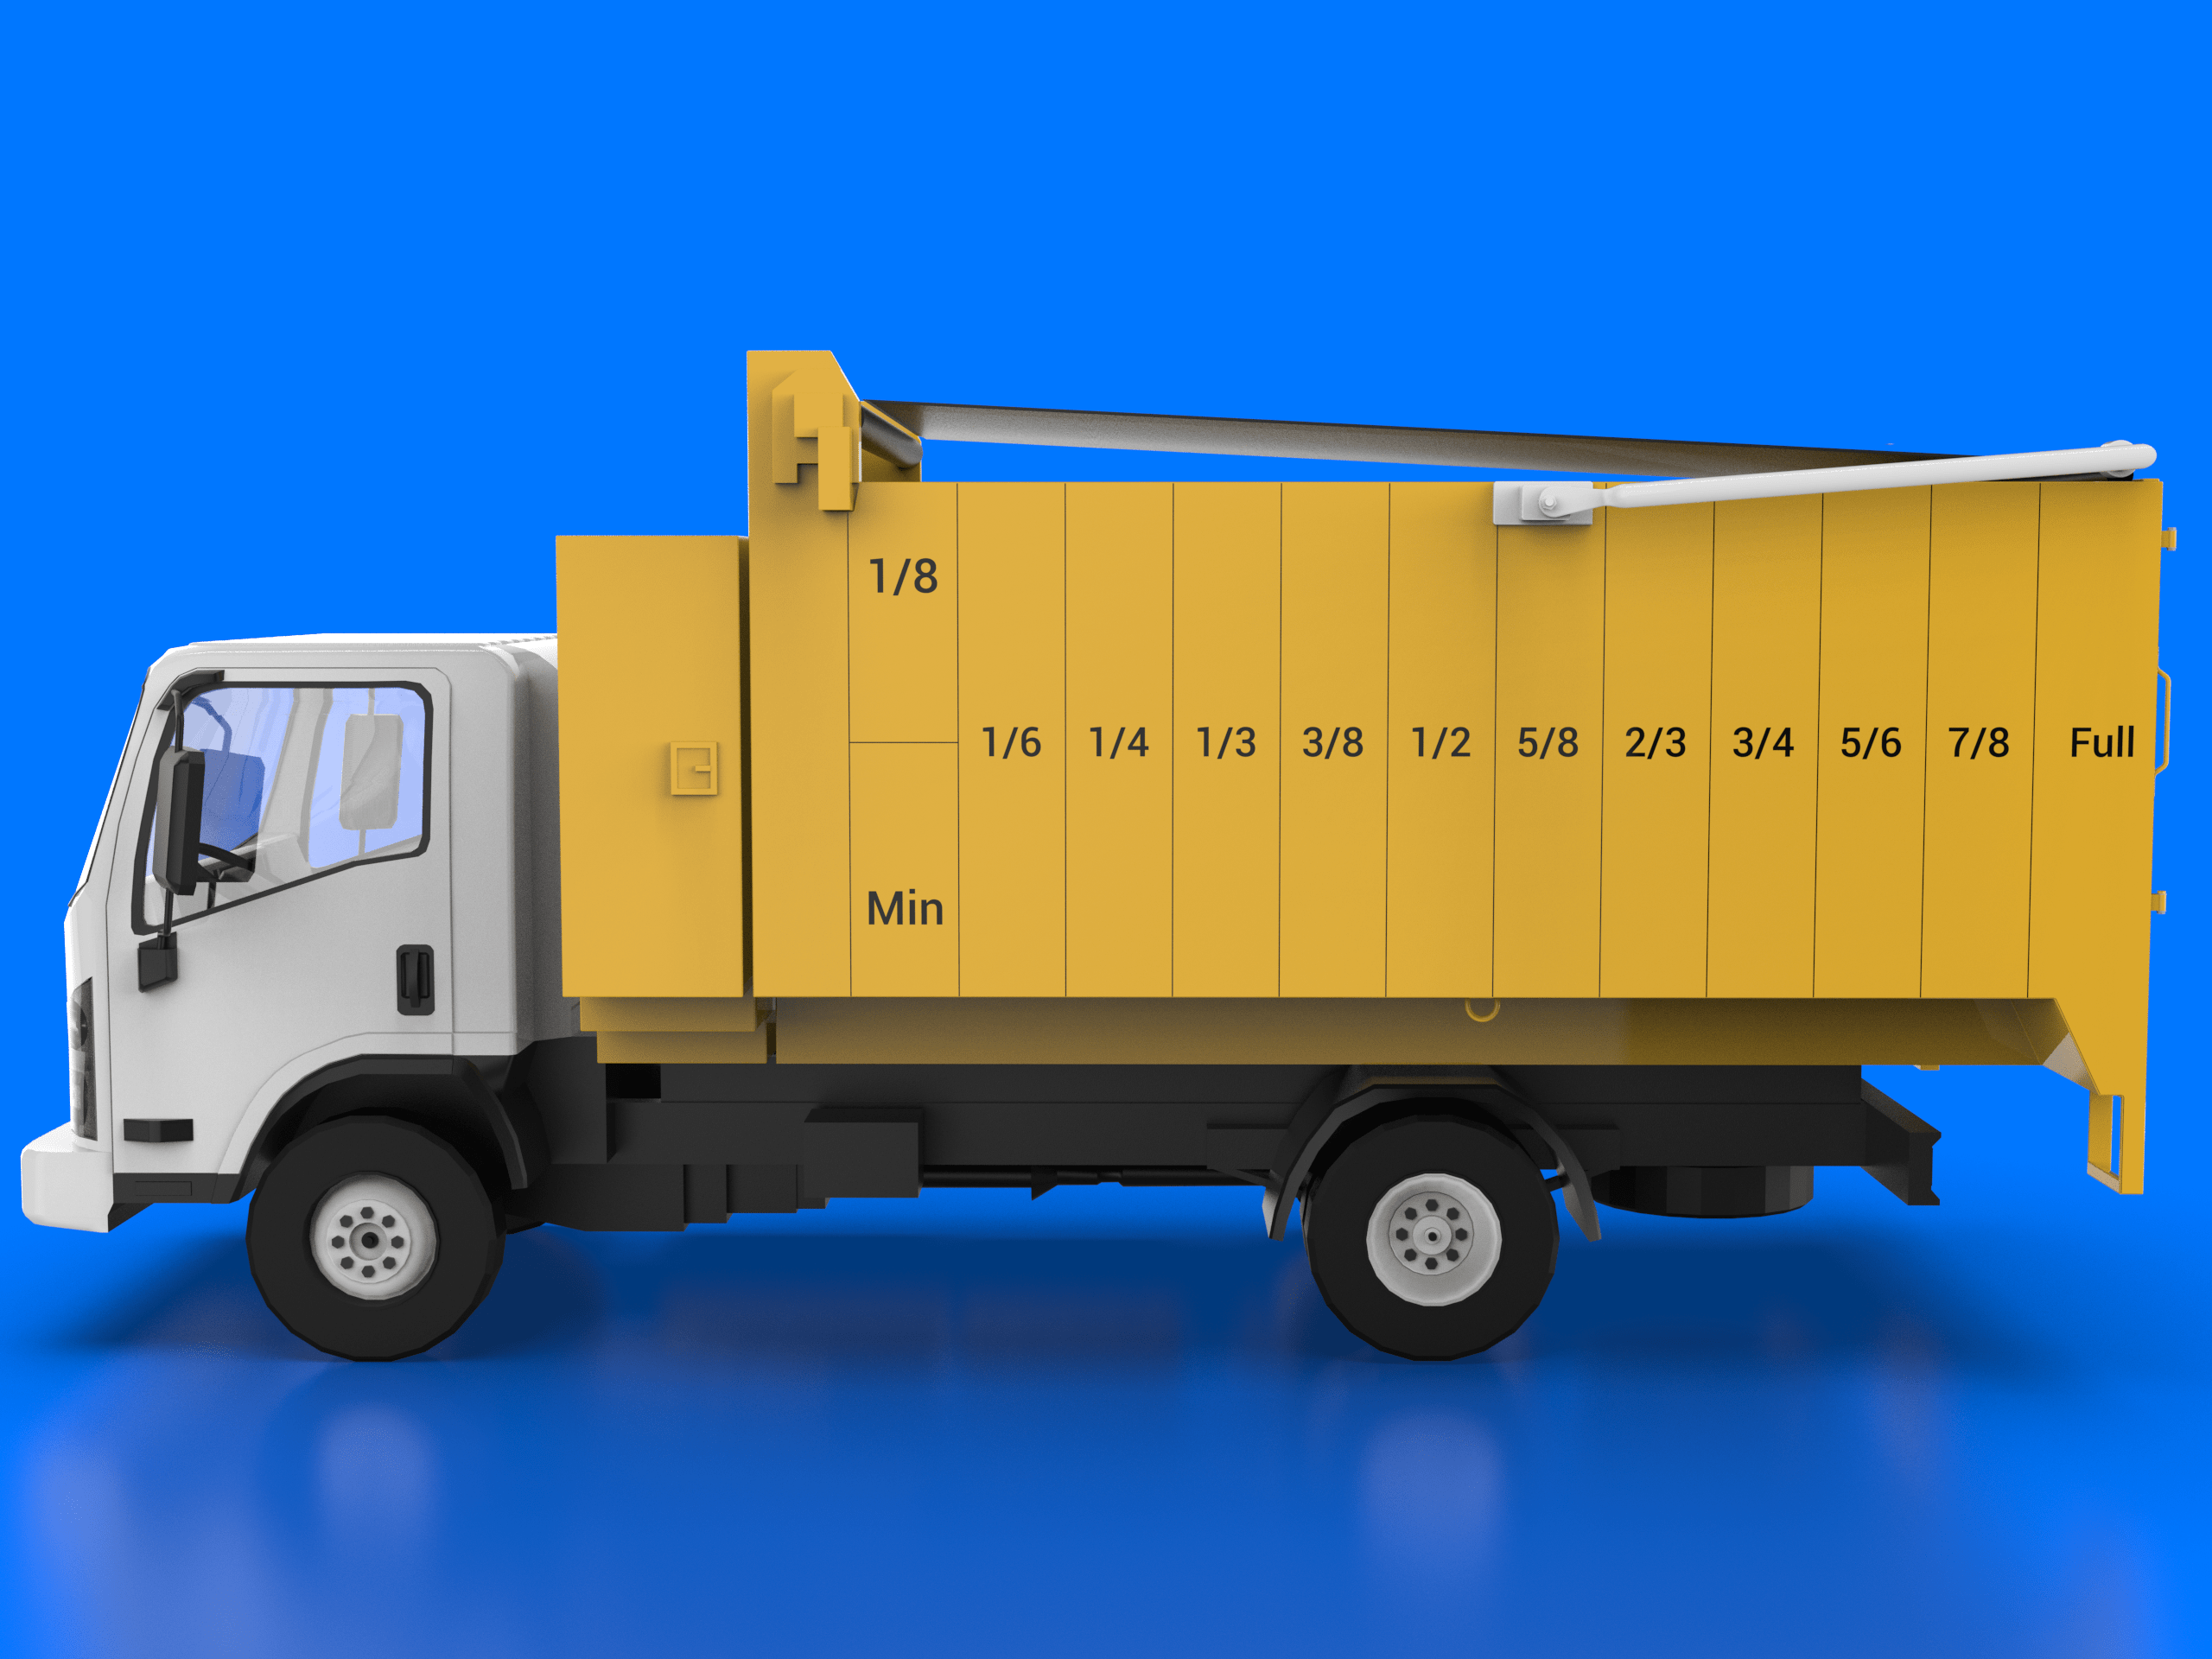 junk-removal-truck-load-sizes